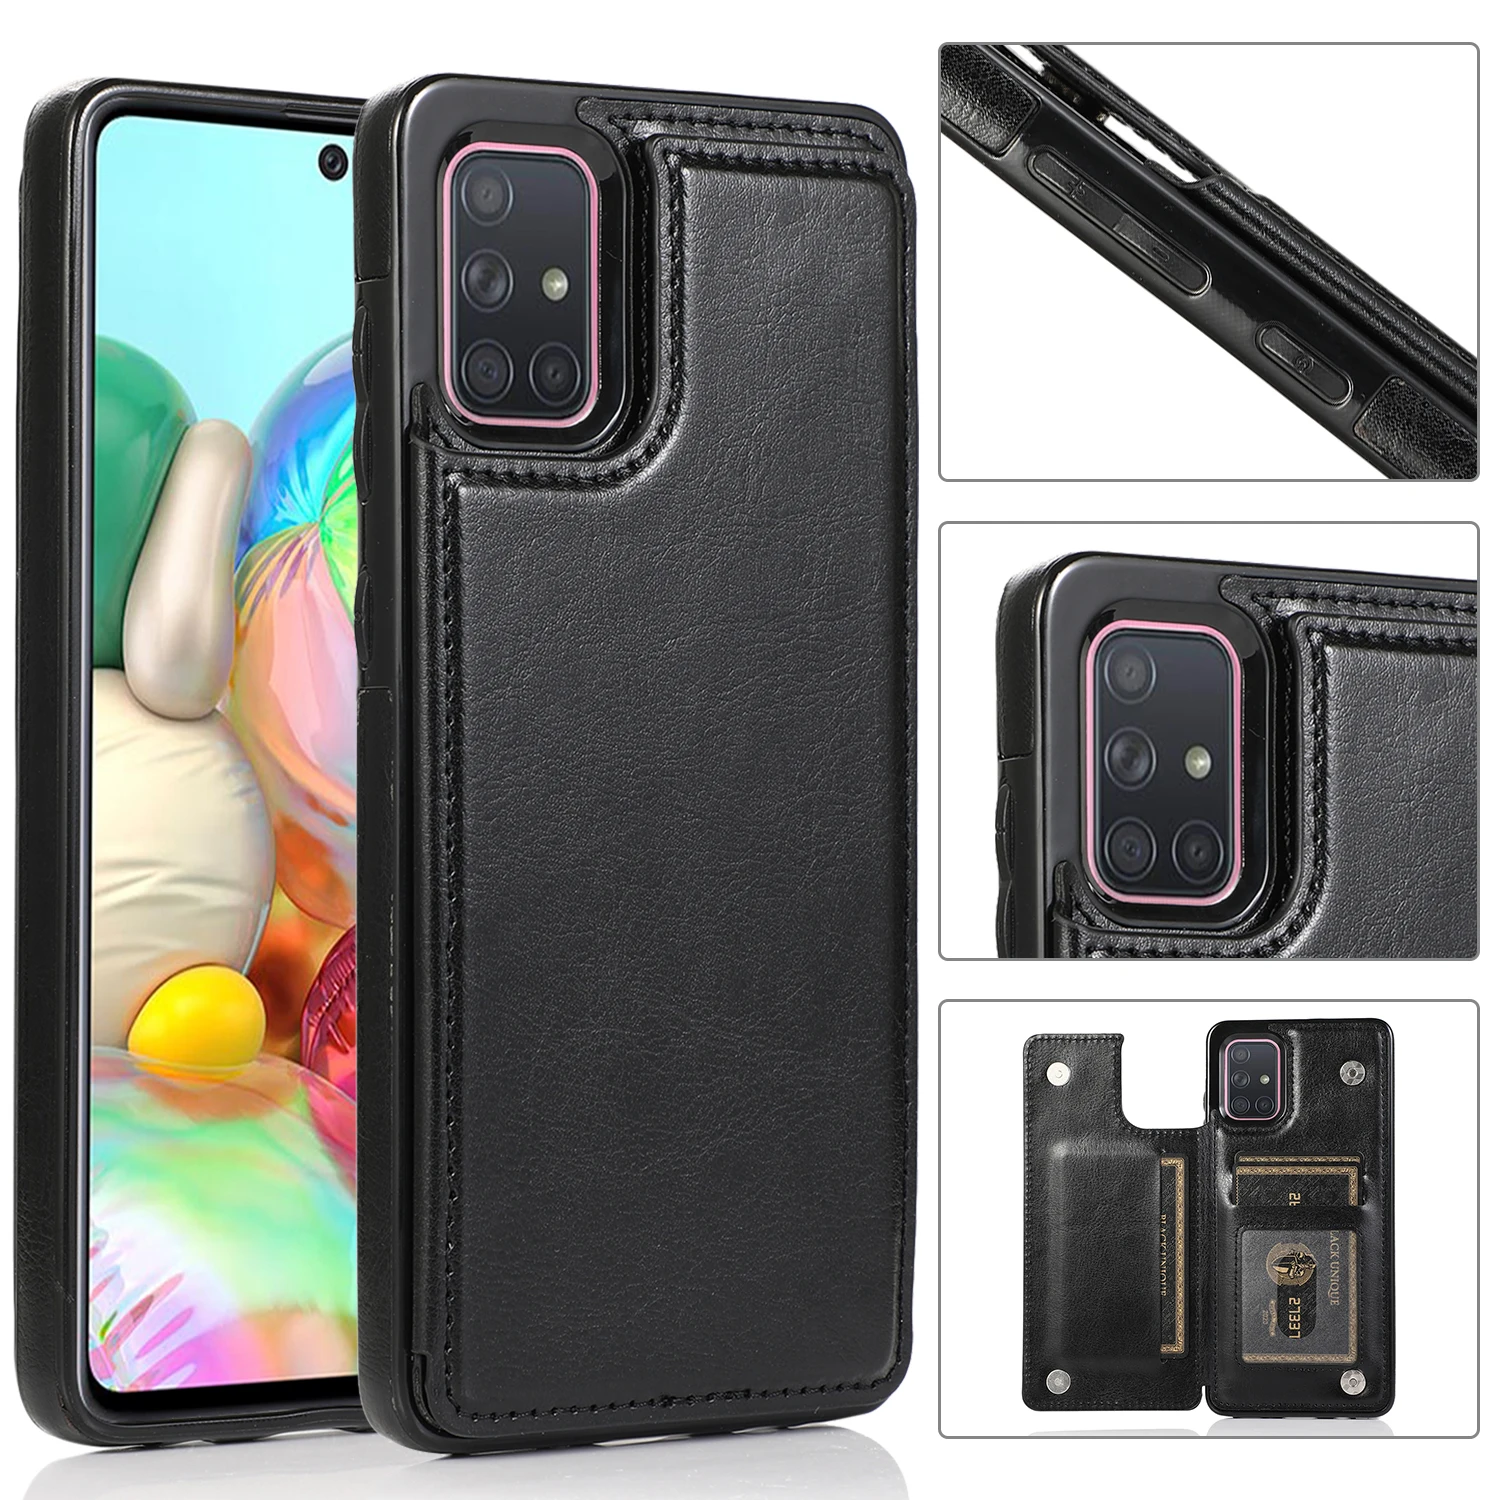 

Phone Case For Samsung A33 A53 A73 A13 A52 A72 A51 A71 A50 A70 A22 A82 A12 A42 A21 A30 A20 A10 A14 A54 5G Card Leather Cover